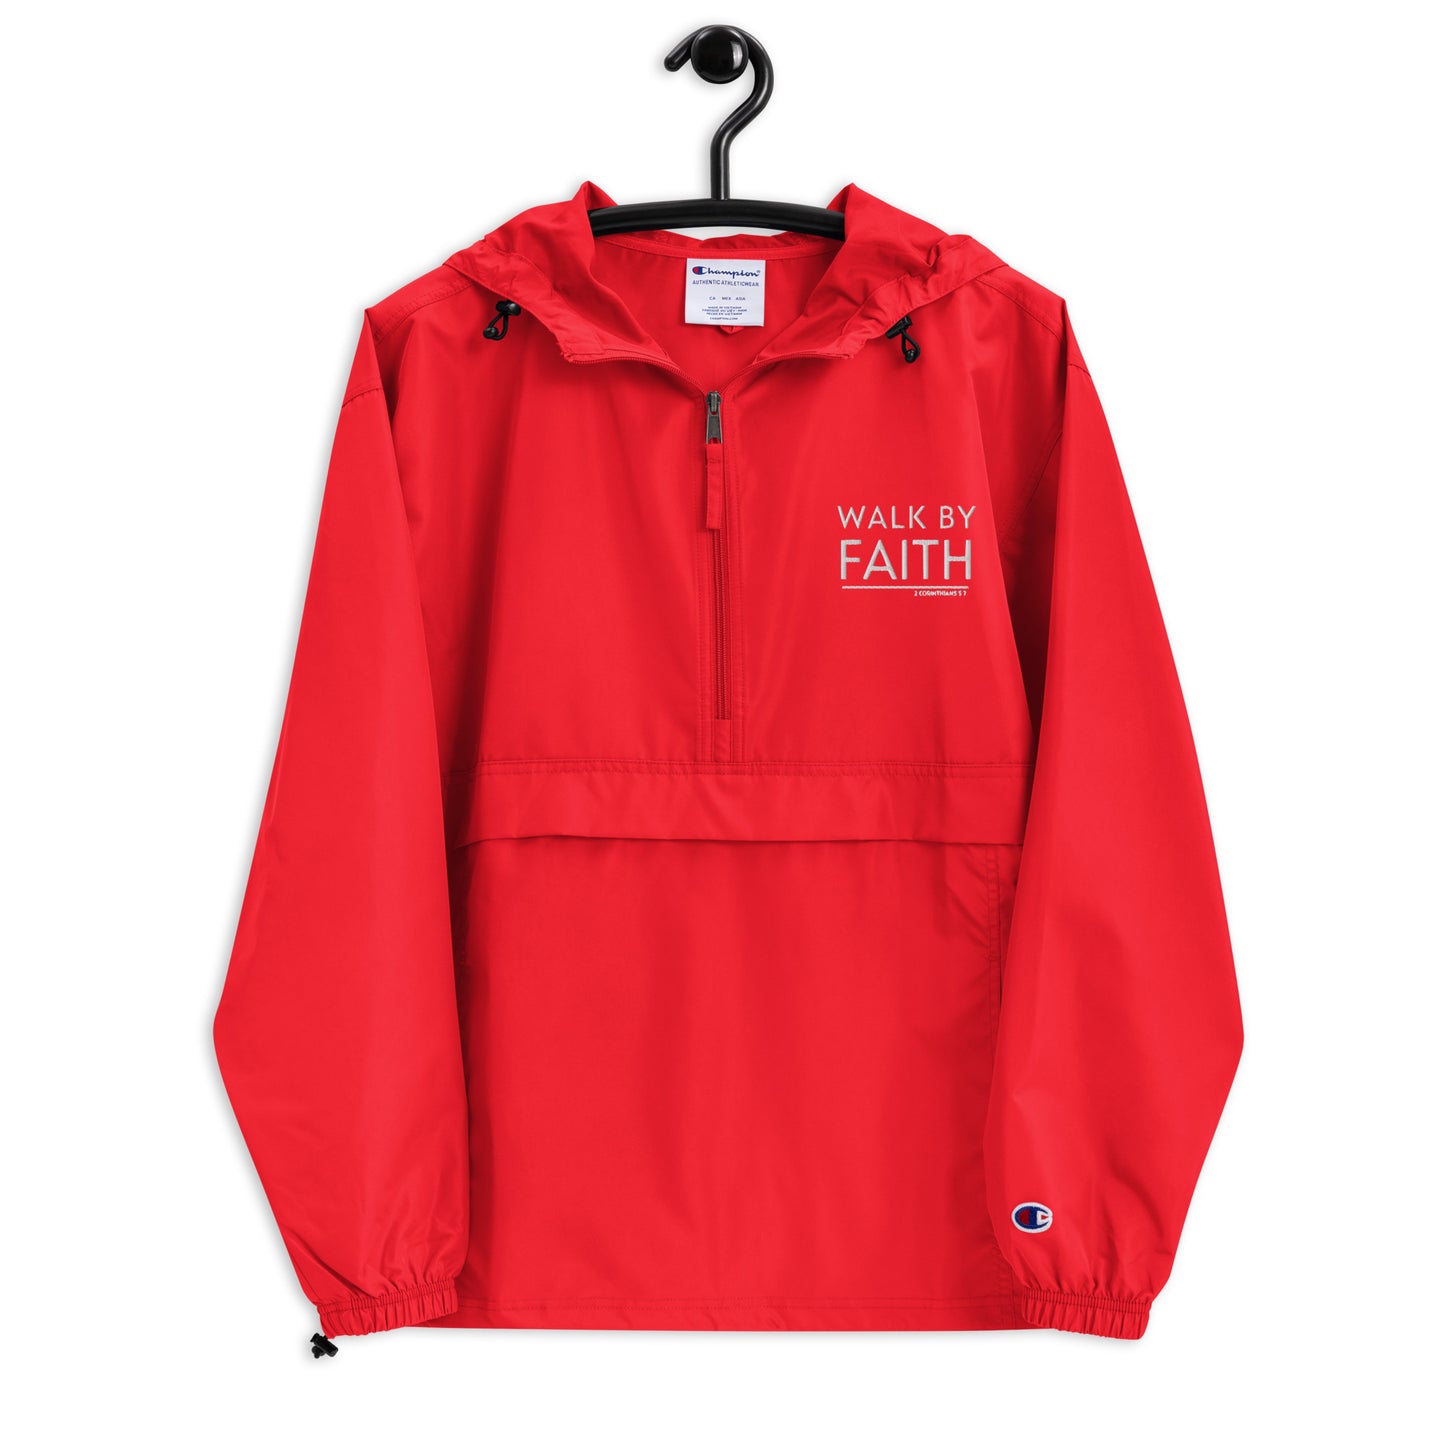 Walk By Faith Embroidered Jacket